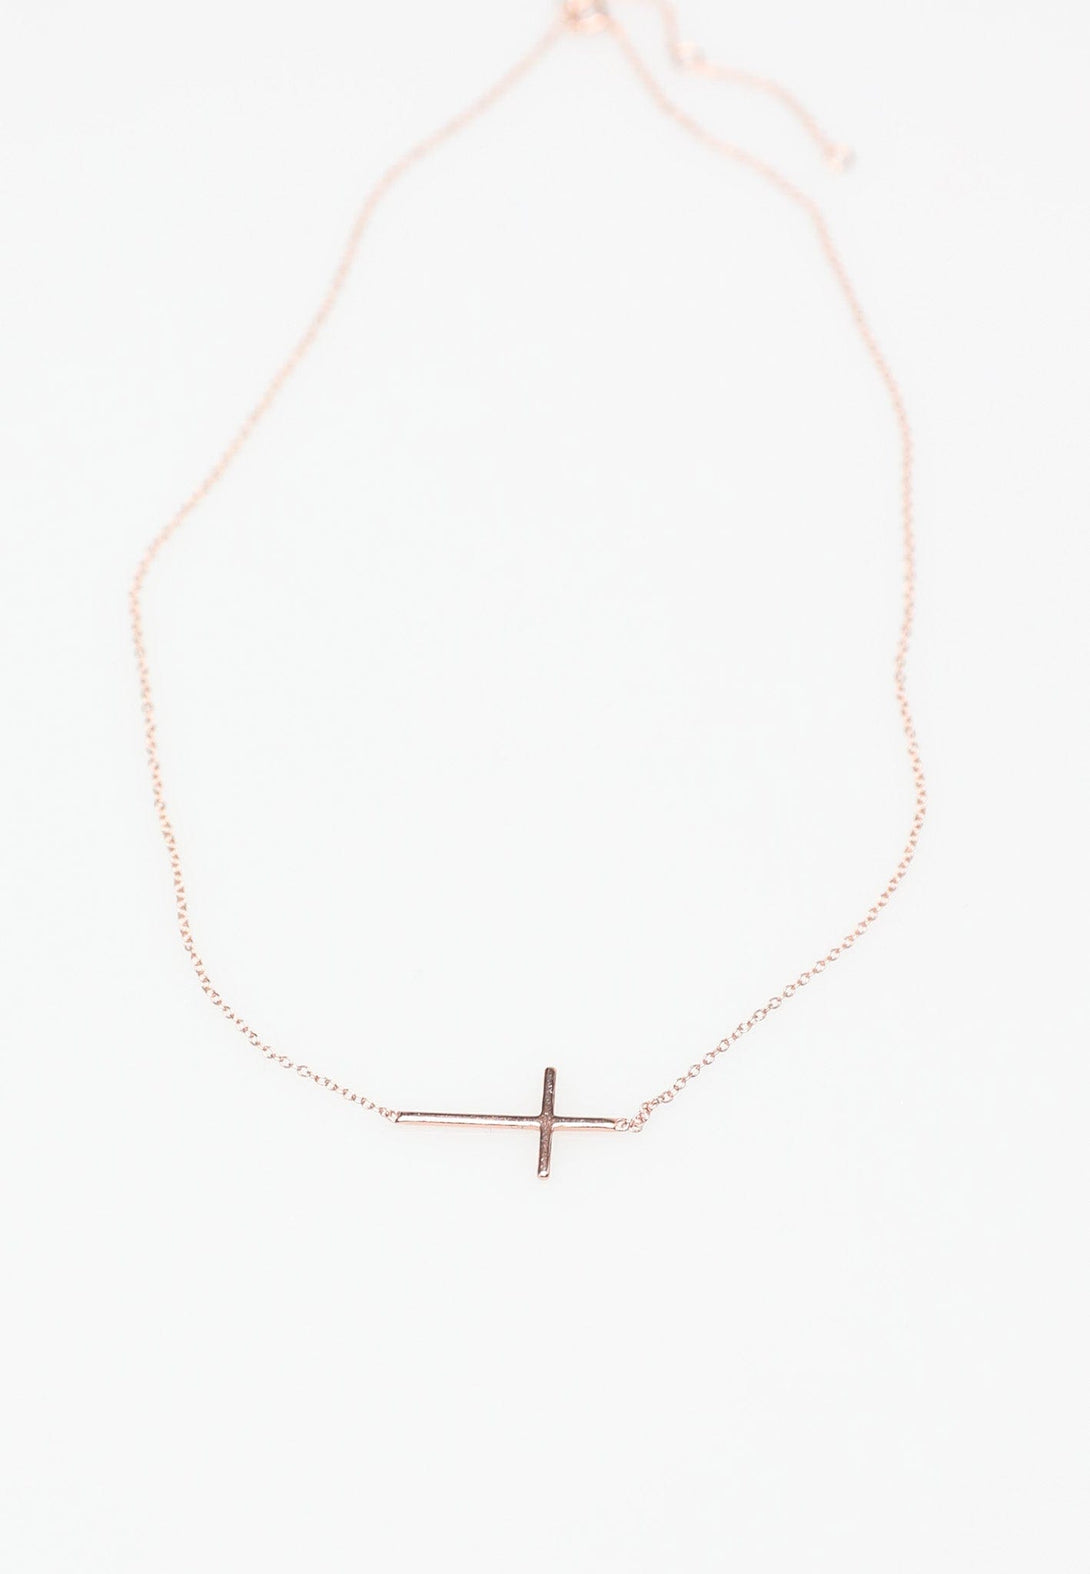 Delicate Chain Necklace with Medium Cross